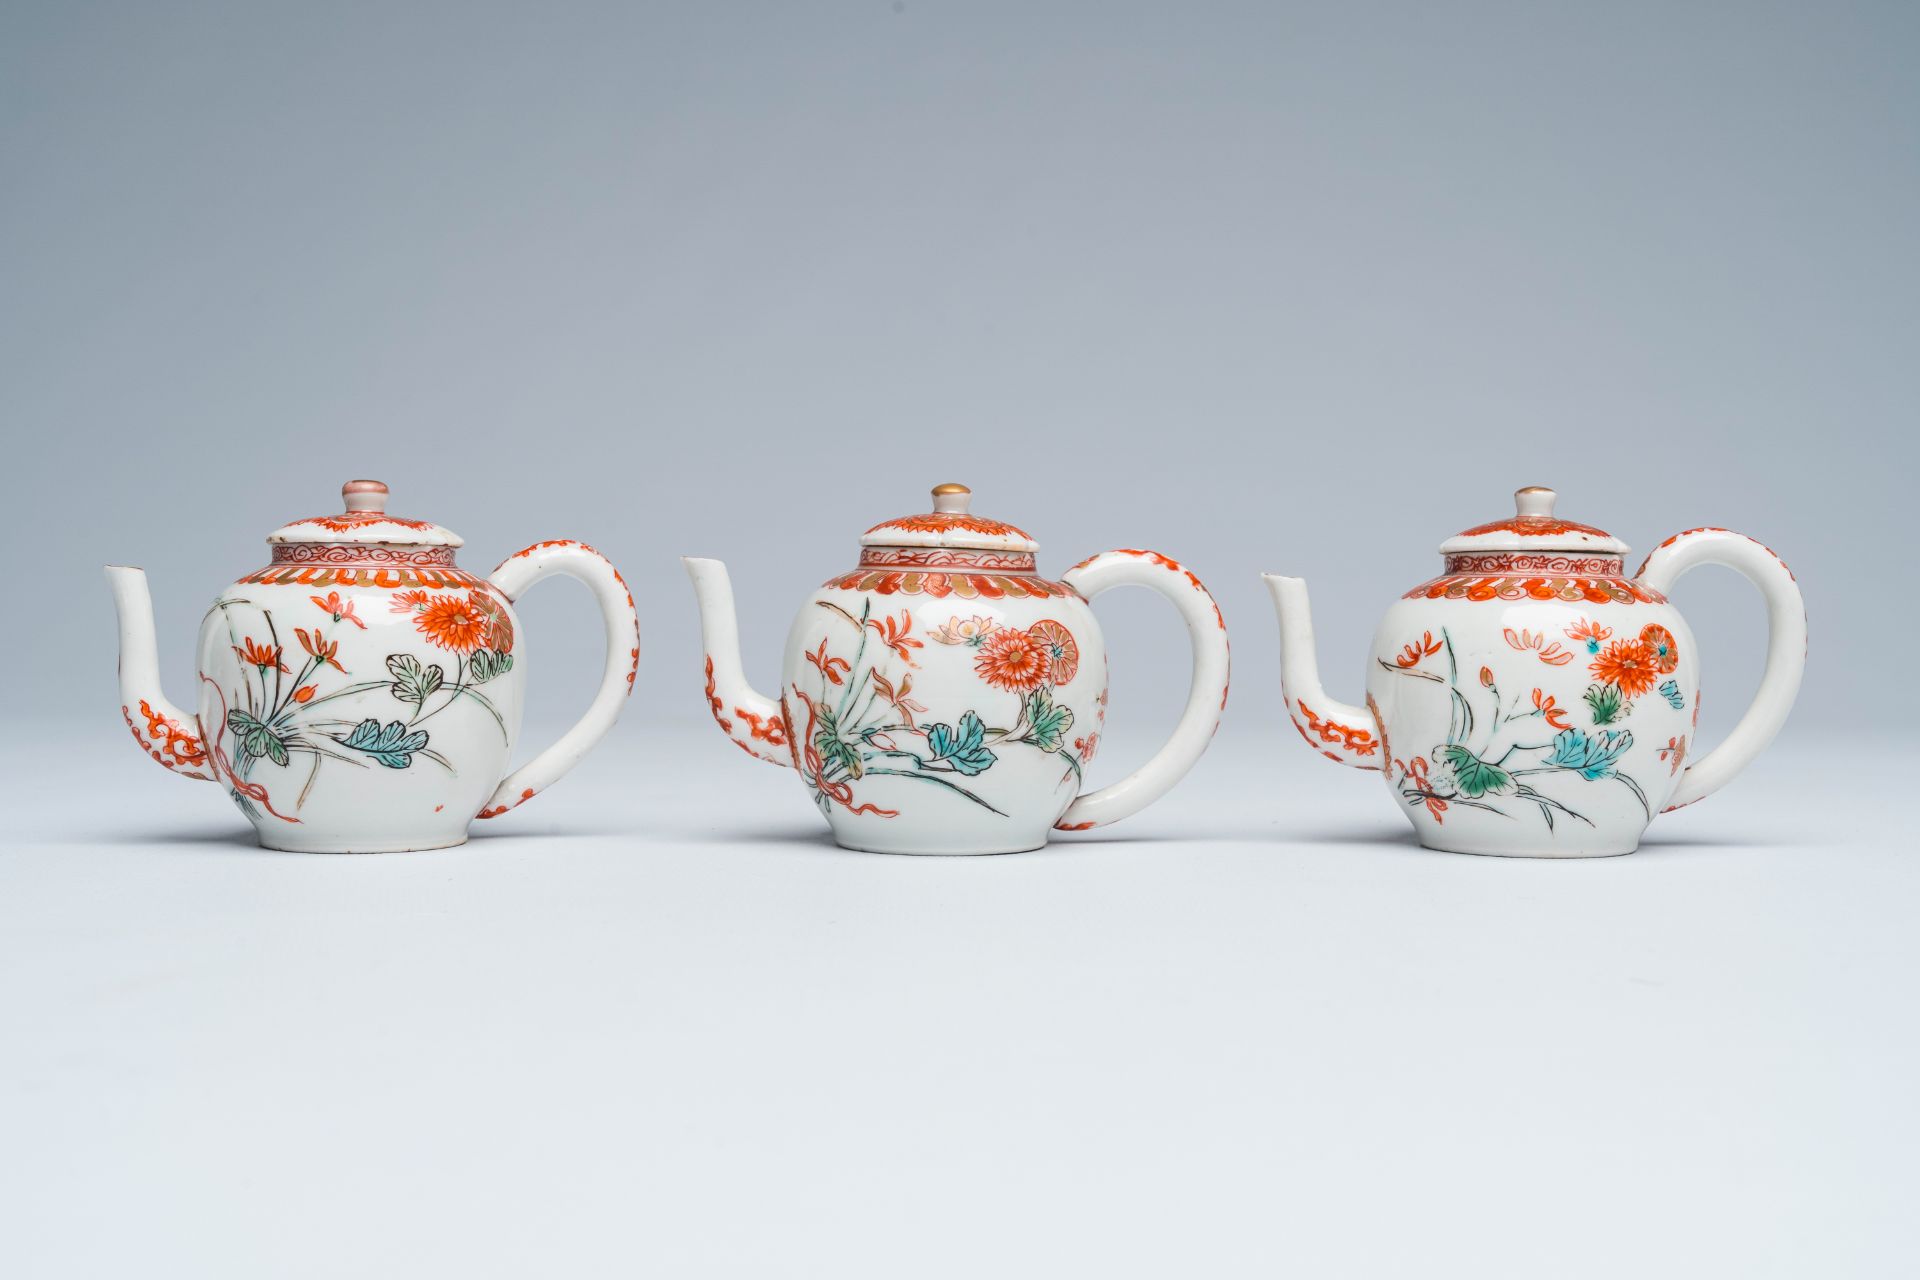 Three Japanese Kakiemon style teapots and covers with floral design, Edo, late 17th C. - Image 4 of 7